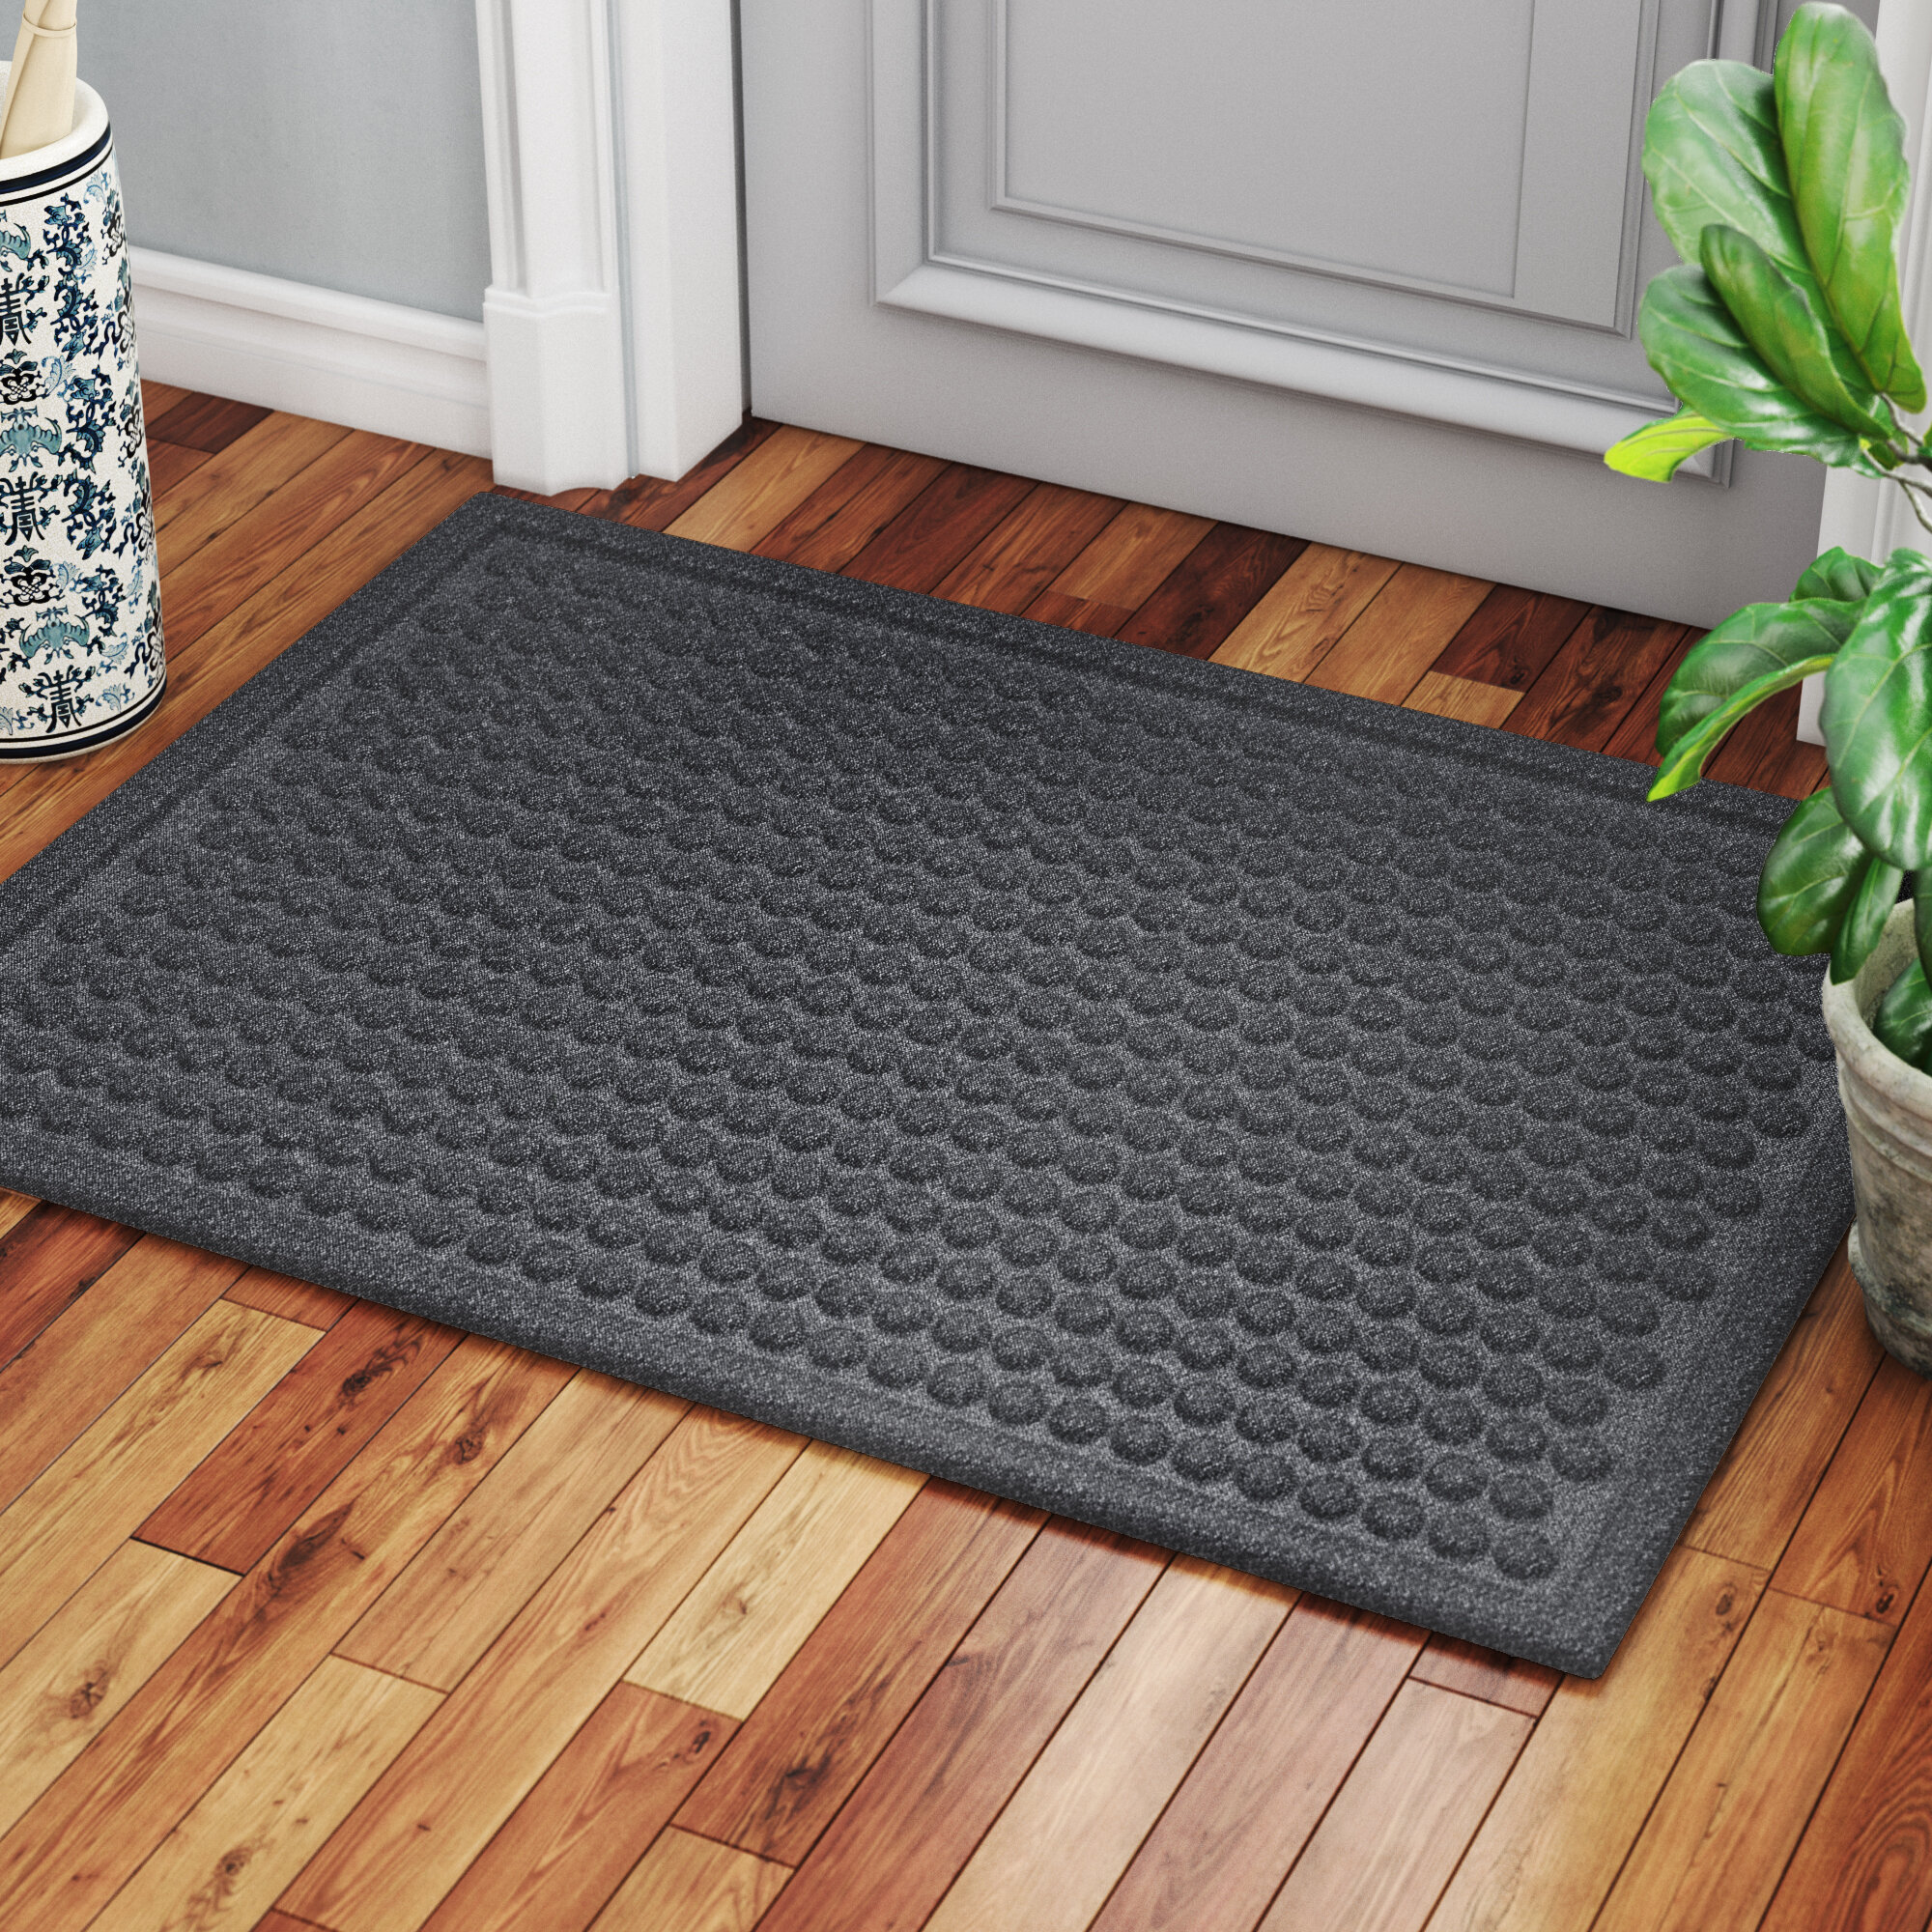 Details about   46x72 in Large Charcoal Gray Rubber Commercial Door Mat Outdoor Entry Rug Porch 